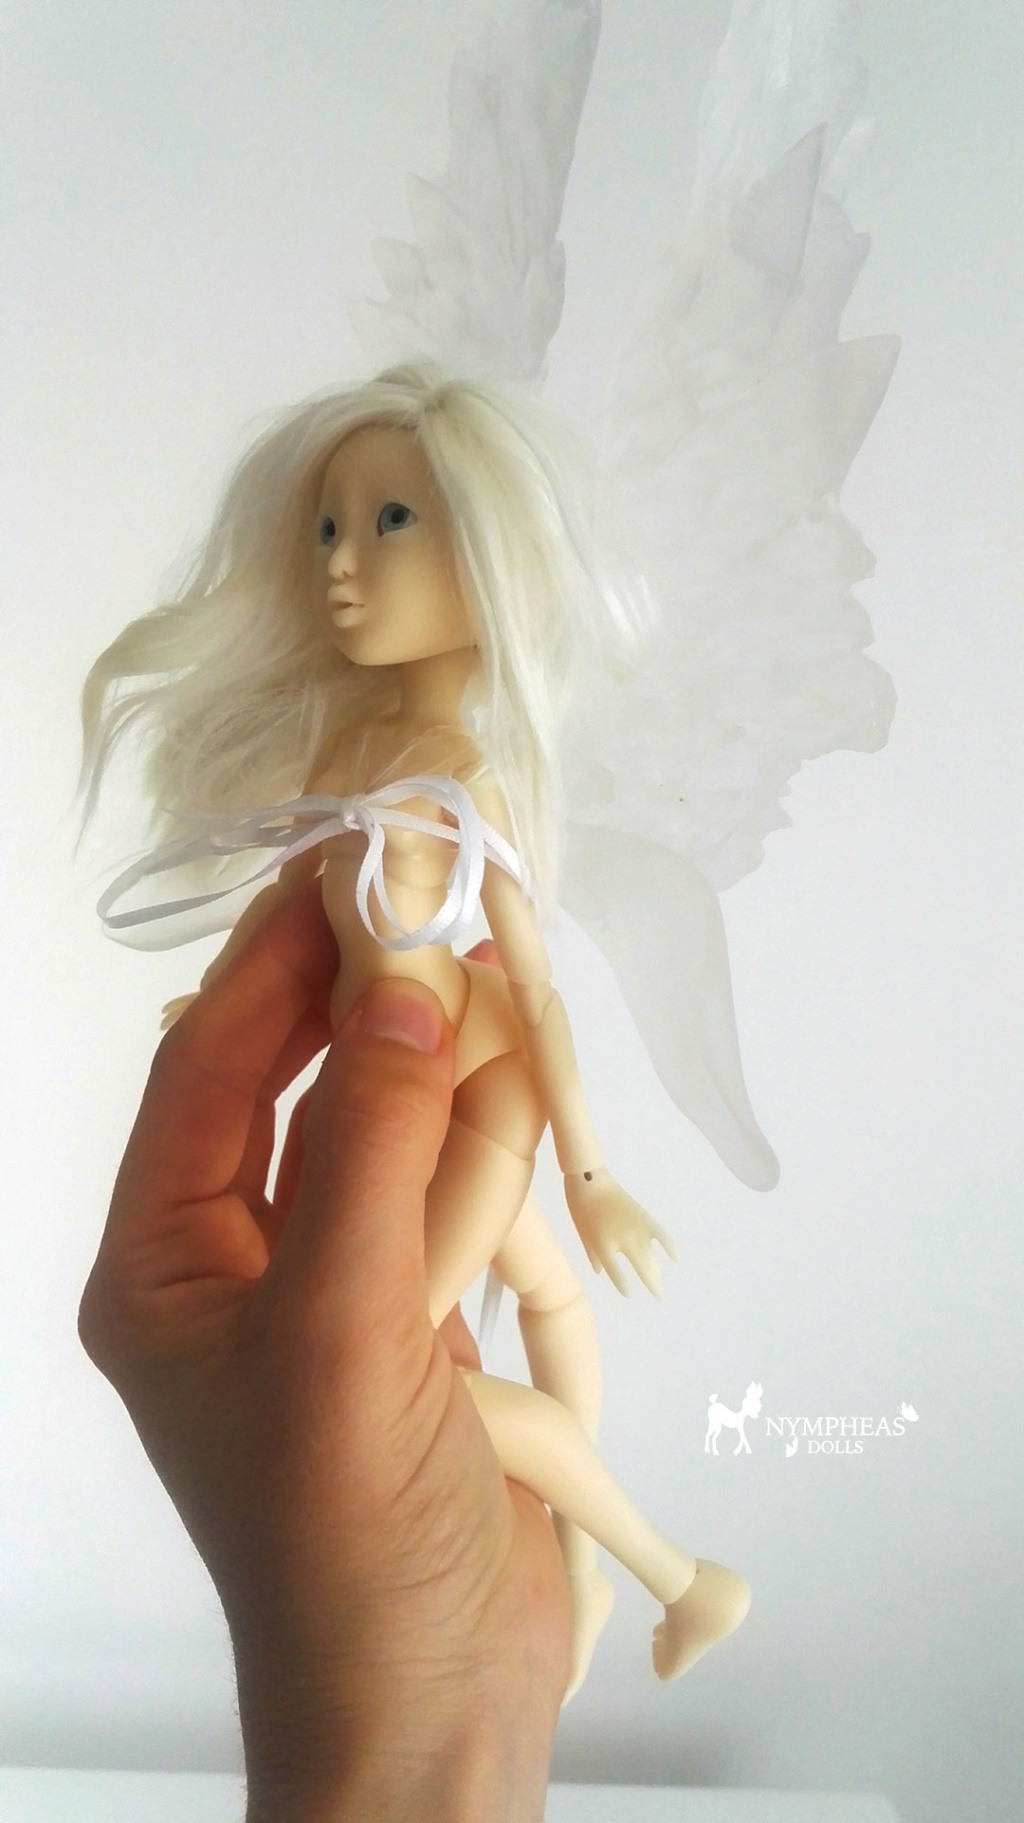 [NYMPHEAS DOLLS] Anniversaire Nympheas Dolls  P37 - Page 32 Wings210